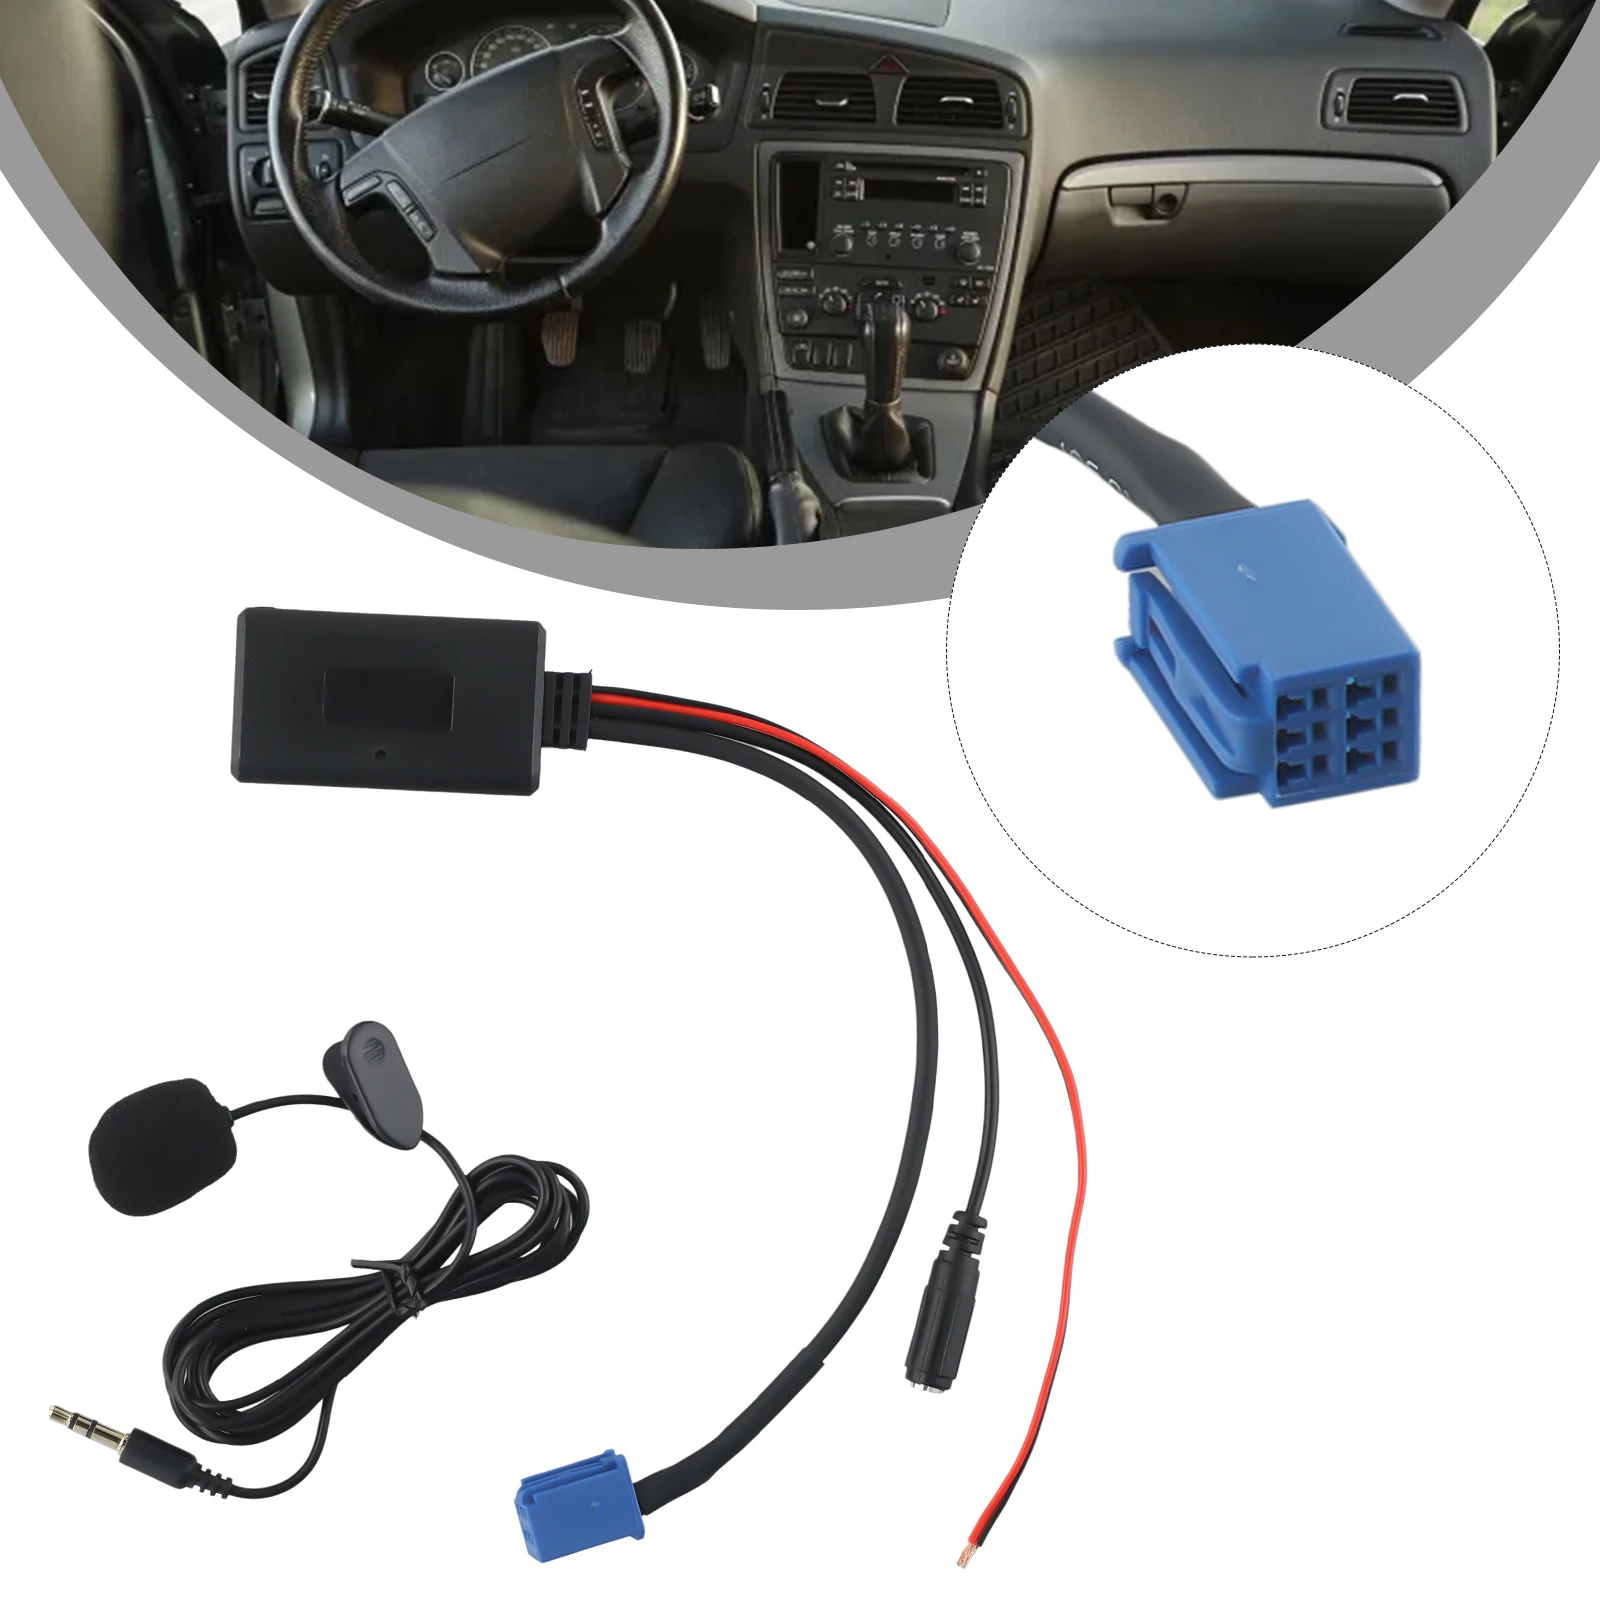 

Adapter Cable Bluetooth Cable 1pcs 5-12V ABS BT5.0 Version Black Brand New For Lexus IS-F 2008 Module Handsfree